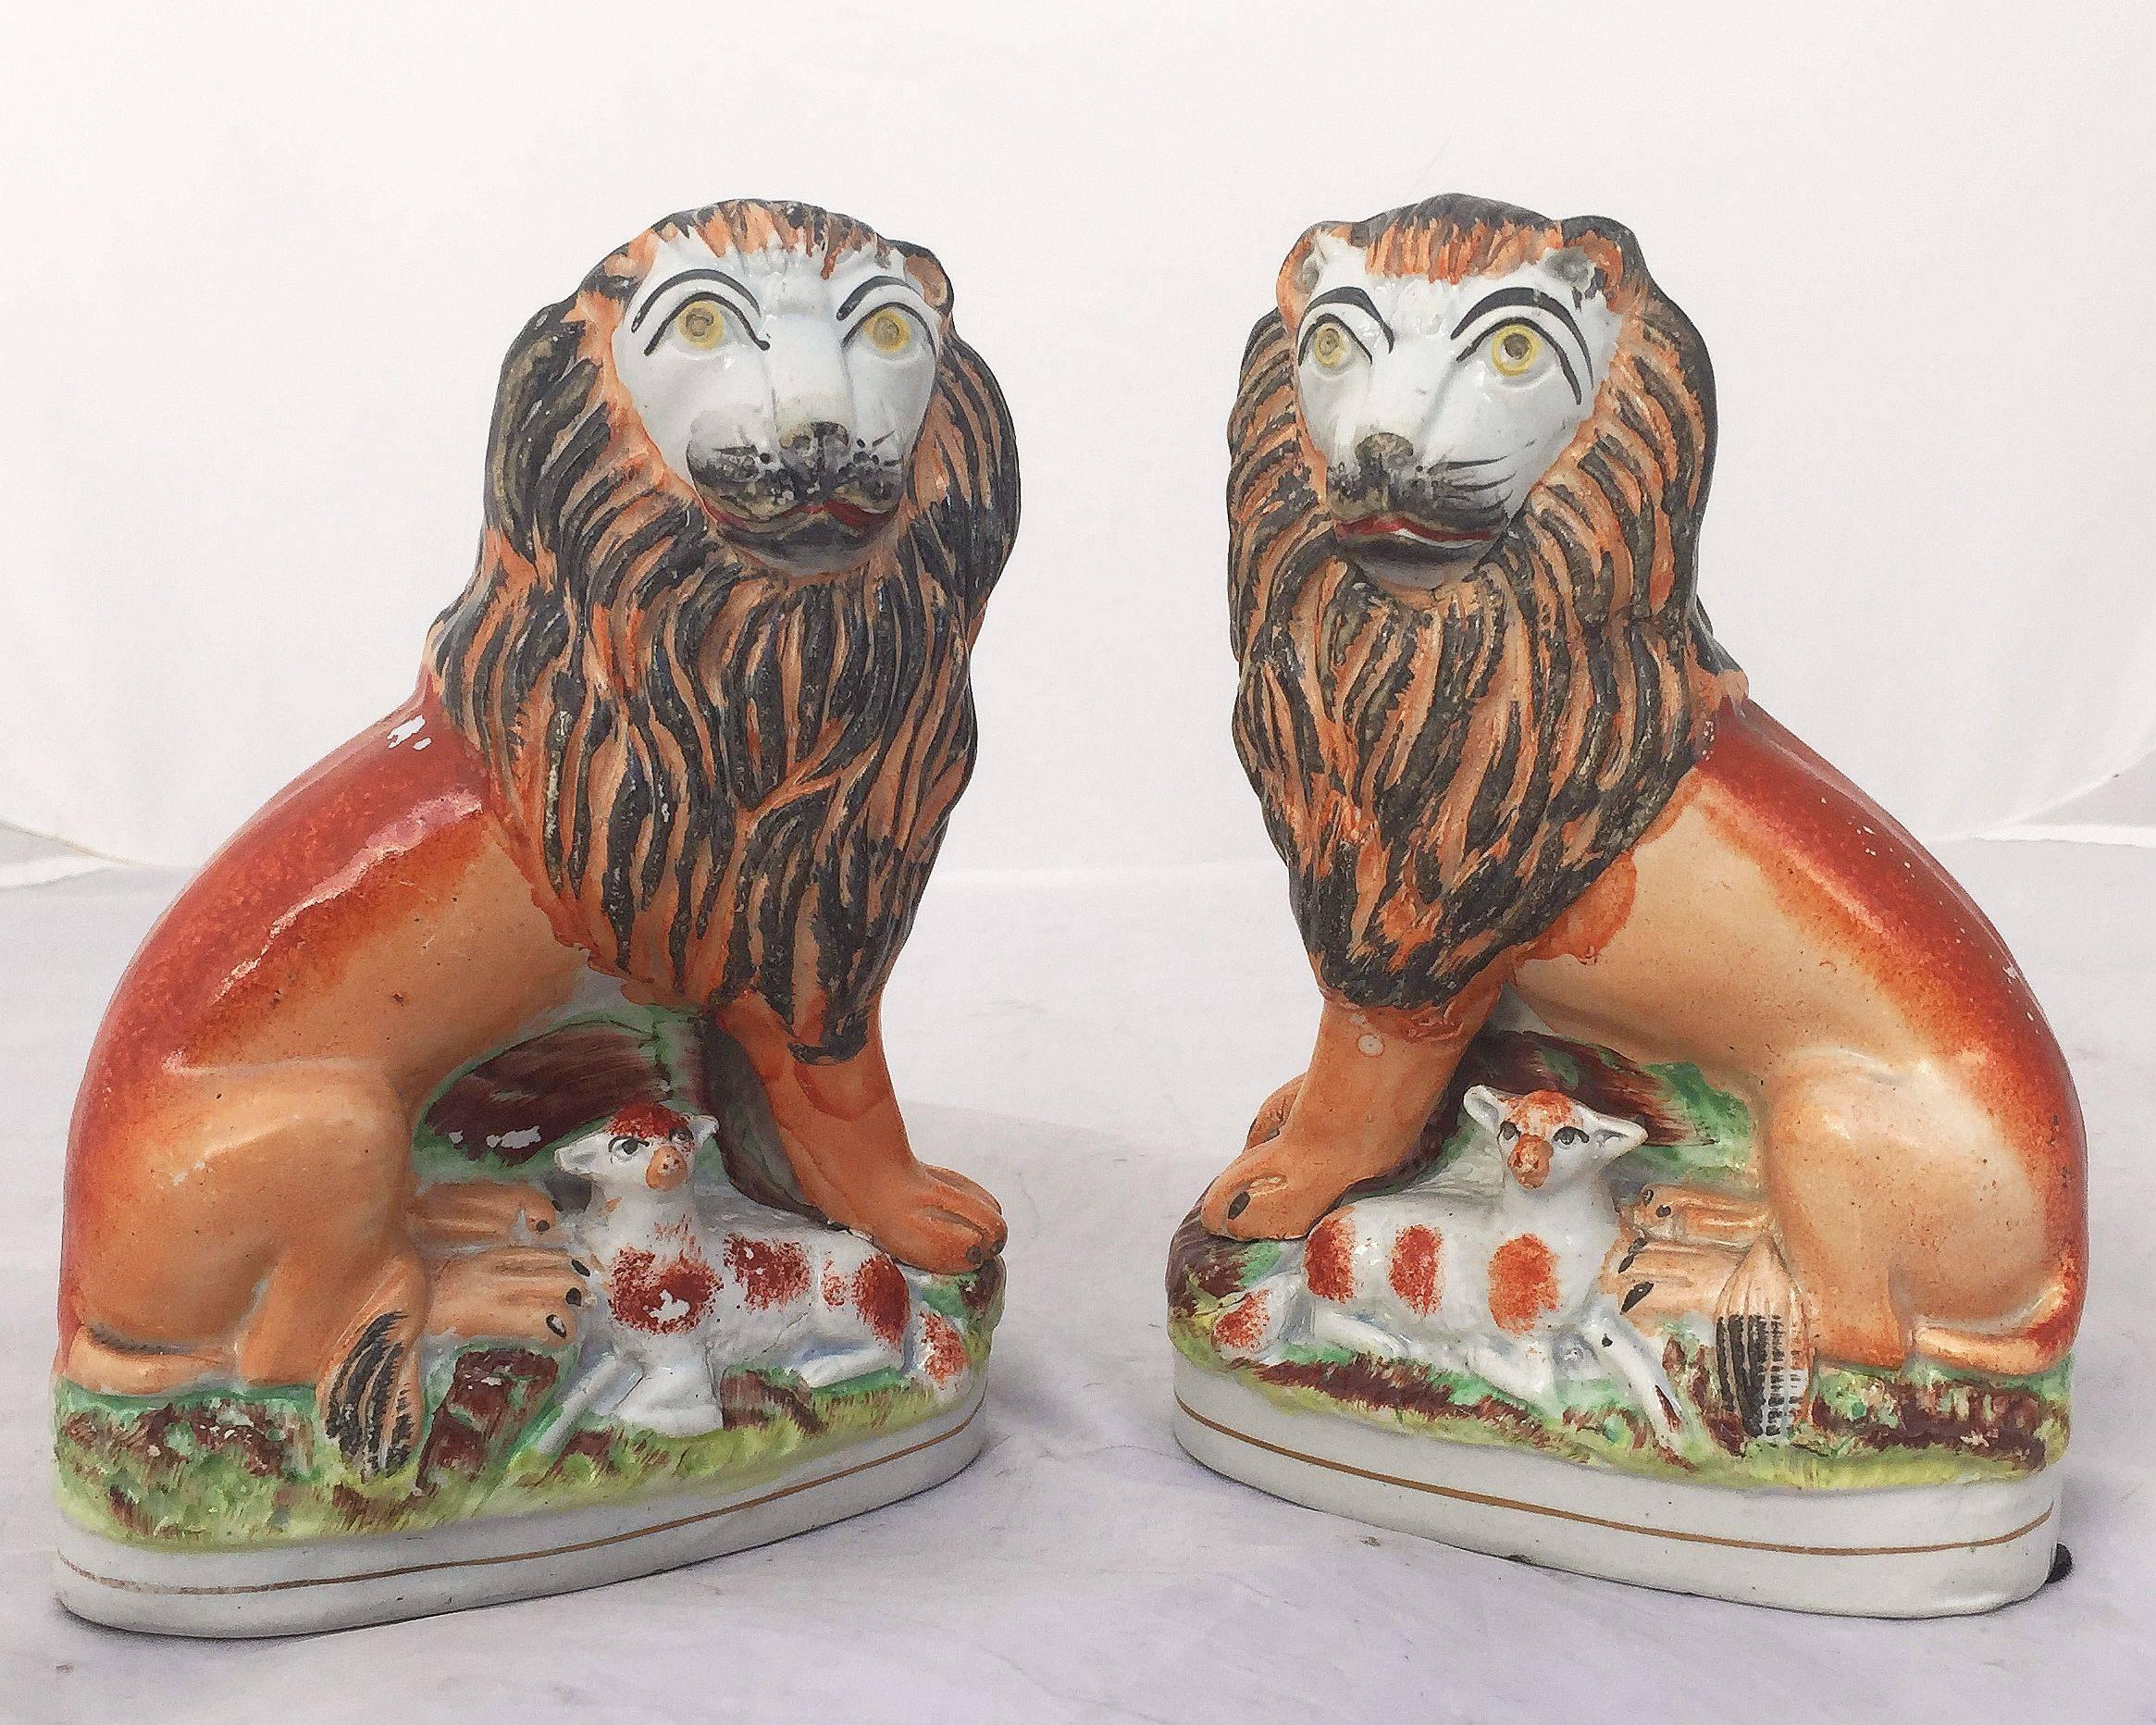 A handsome pair of English Staffordshire pottery decorative animal sculptures, finely modeled and colored as lions with recumbent lambs.
Decorated 'in the round' - decoration to front and reverse.

Denoted as rare among collectors, the pair